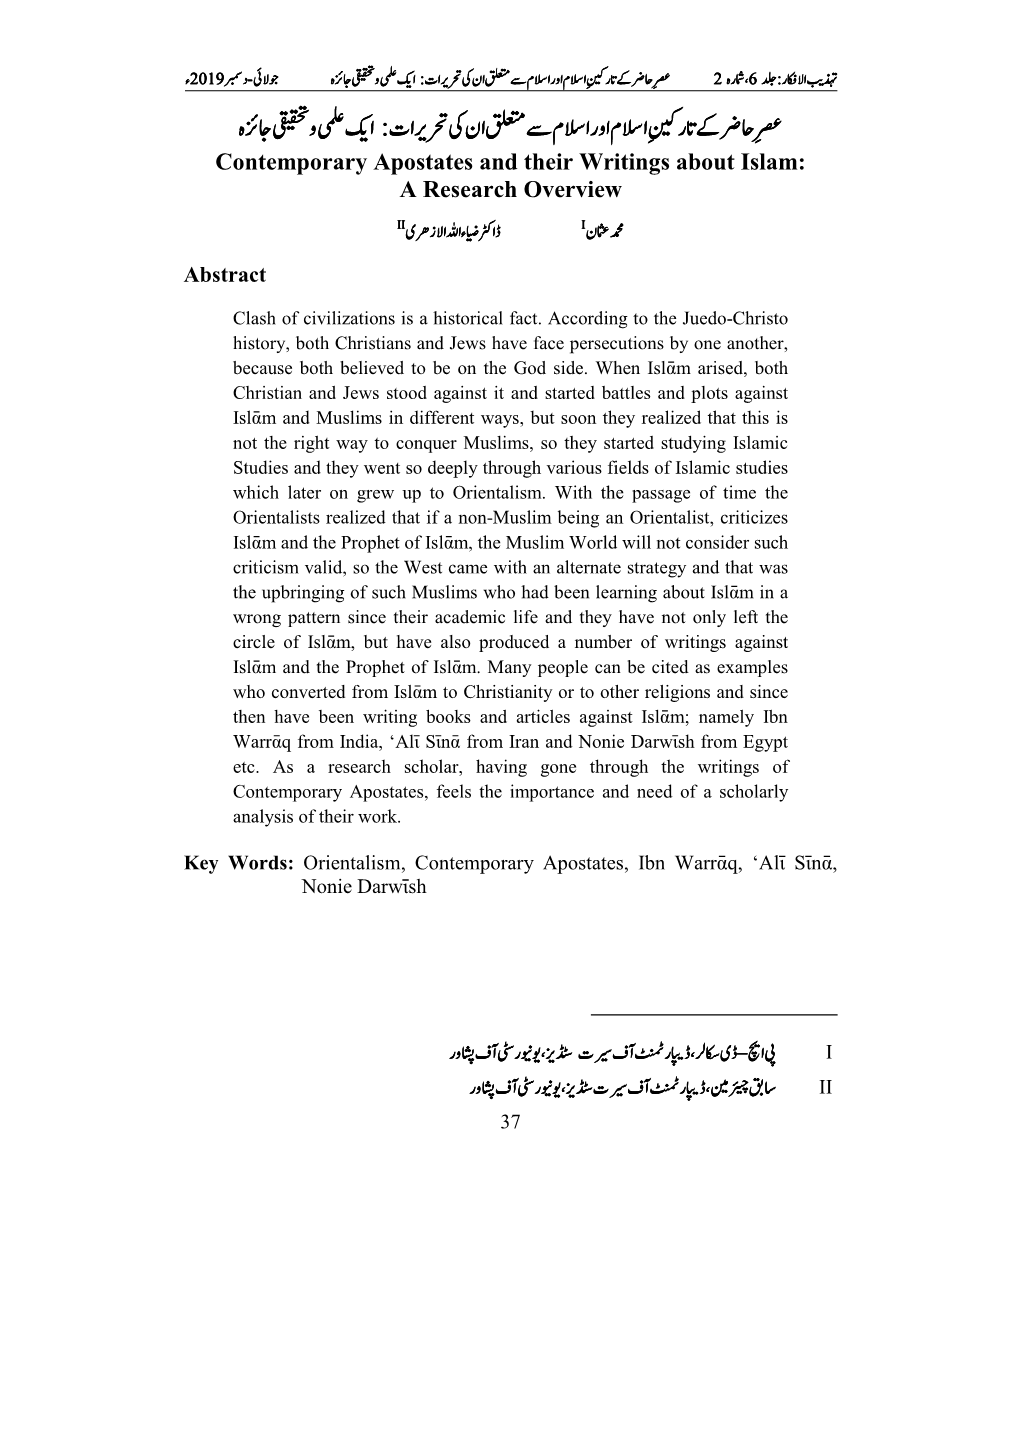 Contemporary Apostates and Their Writings About Islam: a Research Overview